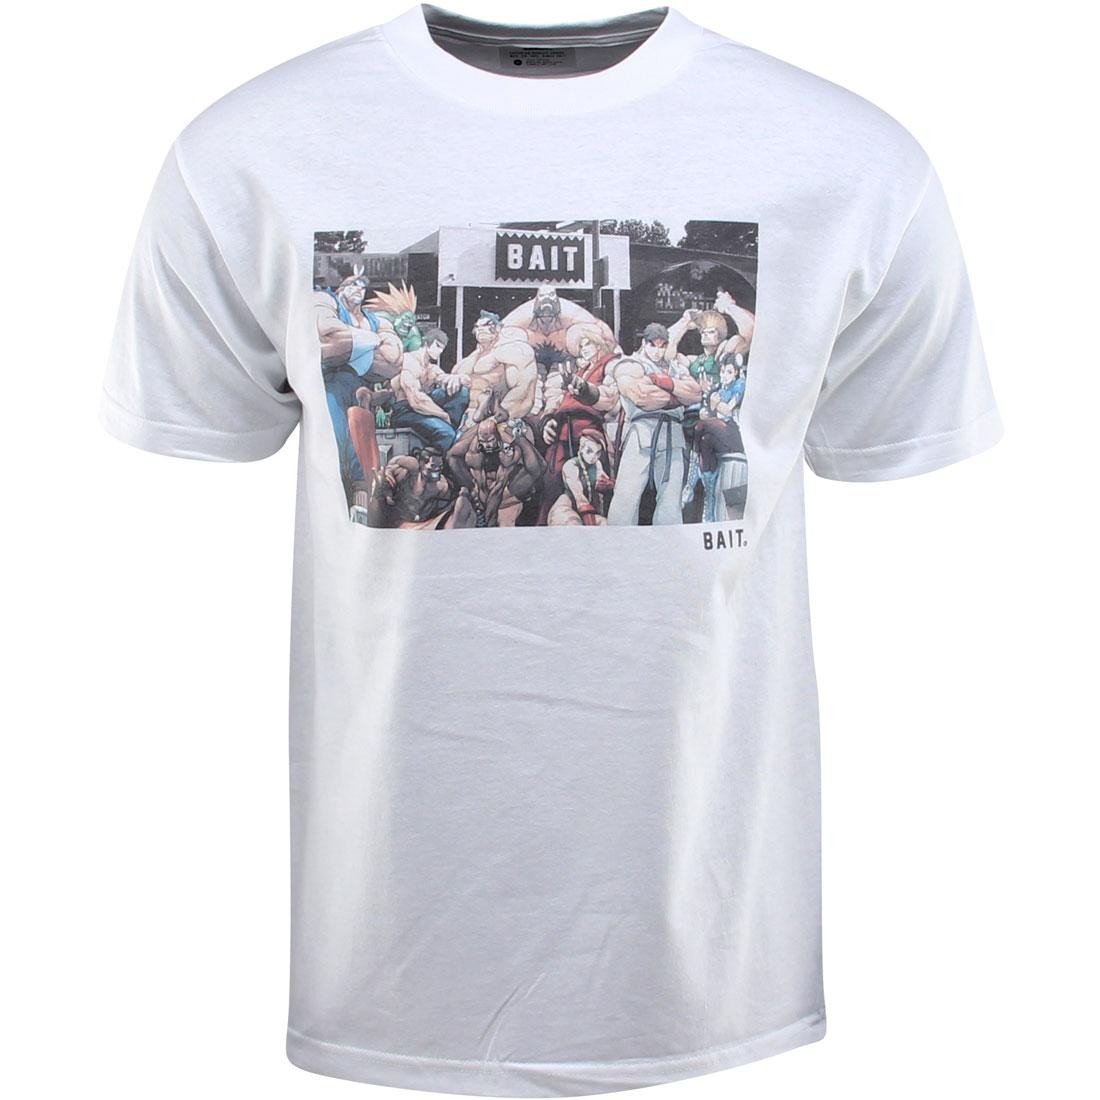 BAIT x Street Fighter Limited Edition Group Snapshot Tee (white)